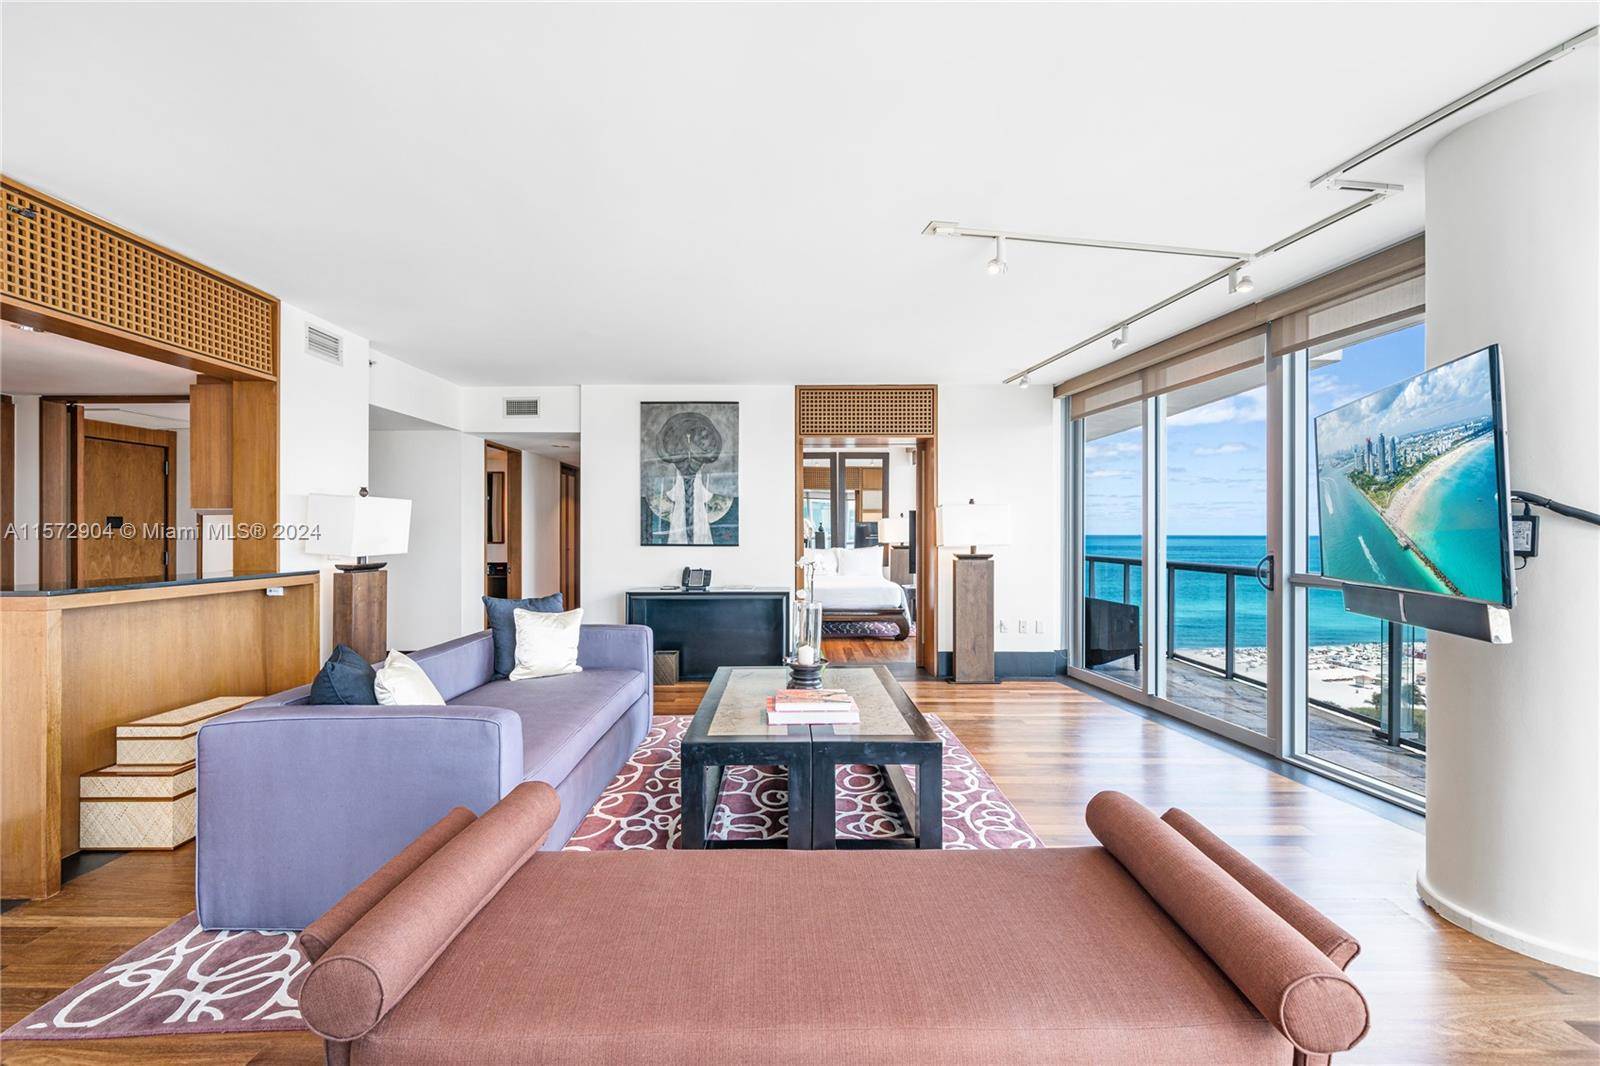 Another Collectable Property by the Jeff Miller Group at The Setai Residences, Miami Beach.